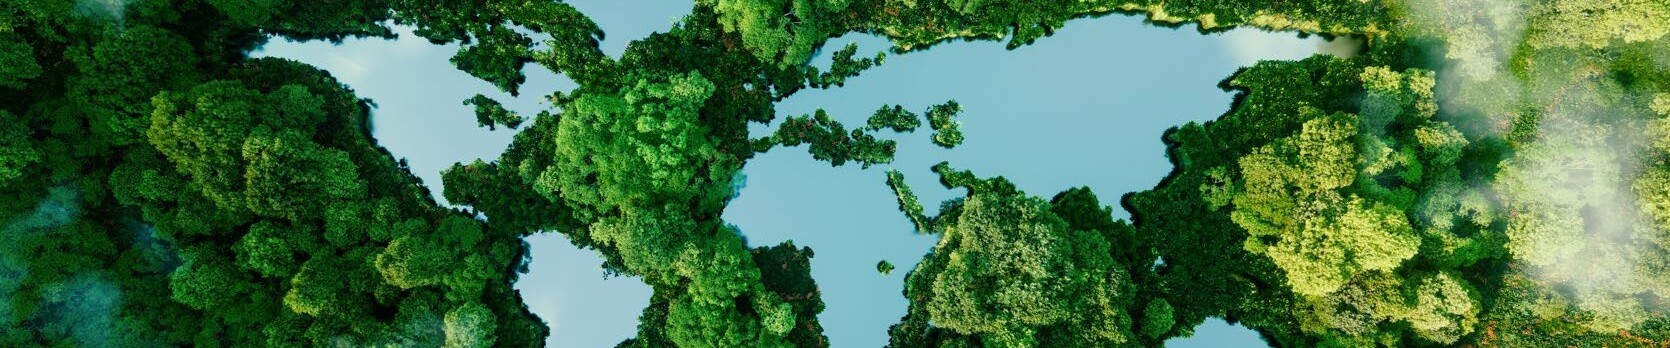 World map out of trees and water